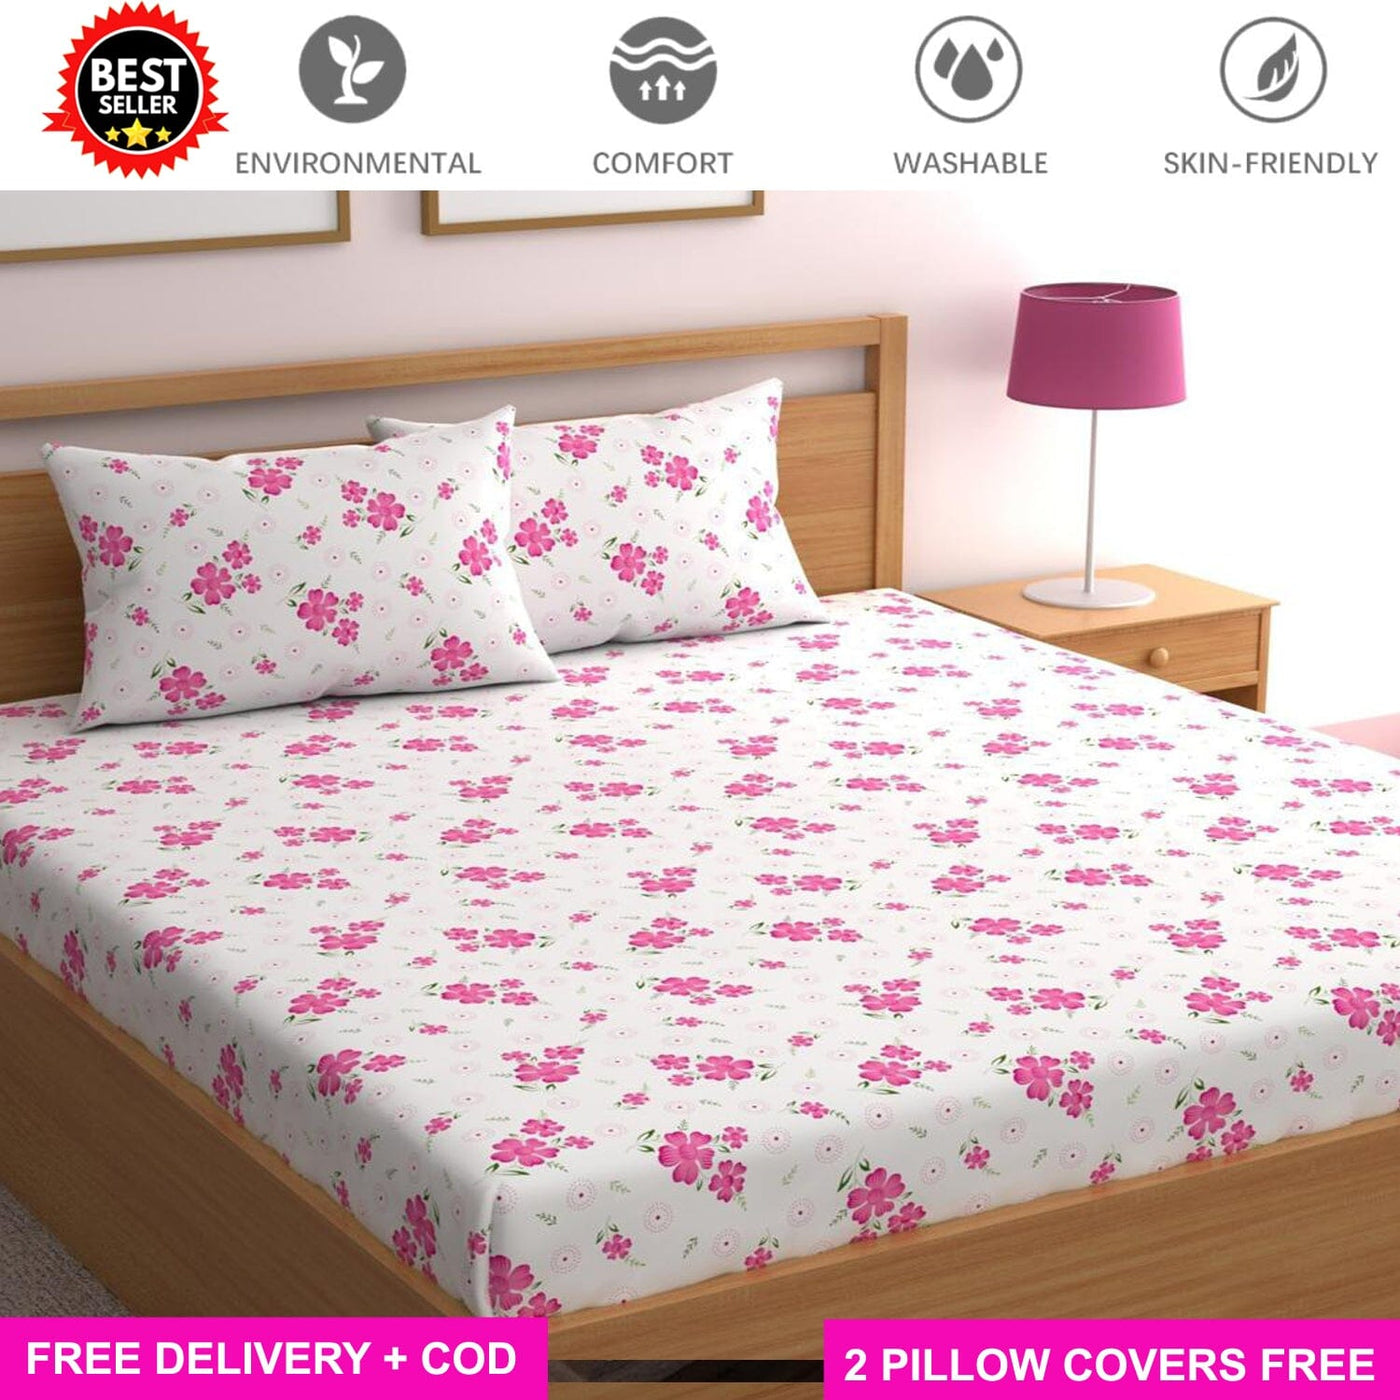 Cotton Elastic Fitted Bedsheet with 2 Pillow Covers - Fits with any Beds & Mattresses Great Happy IN Pink Cosmos KING SIZE 